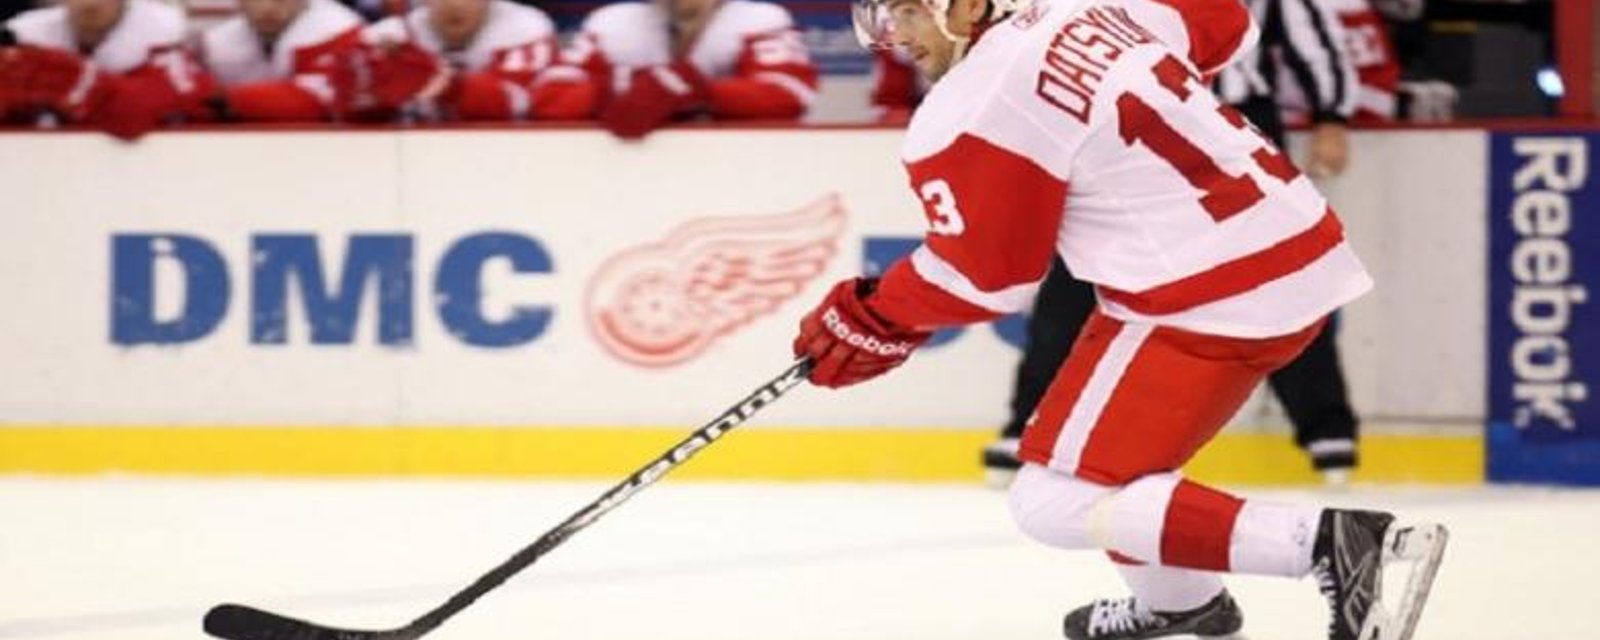 What does Datsyuk returning mean for the Wings?